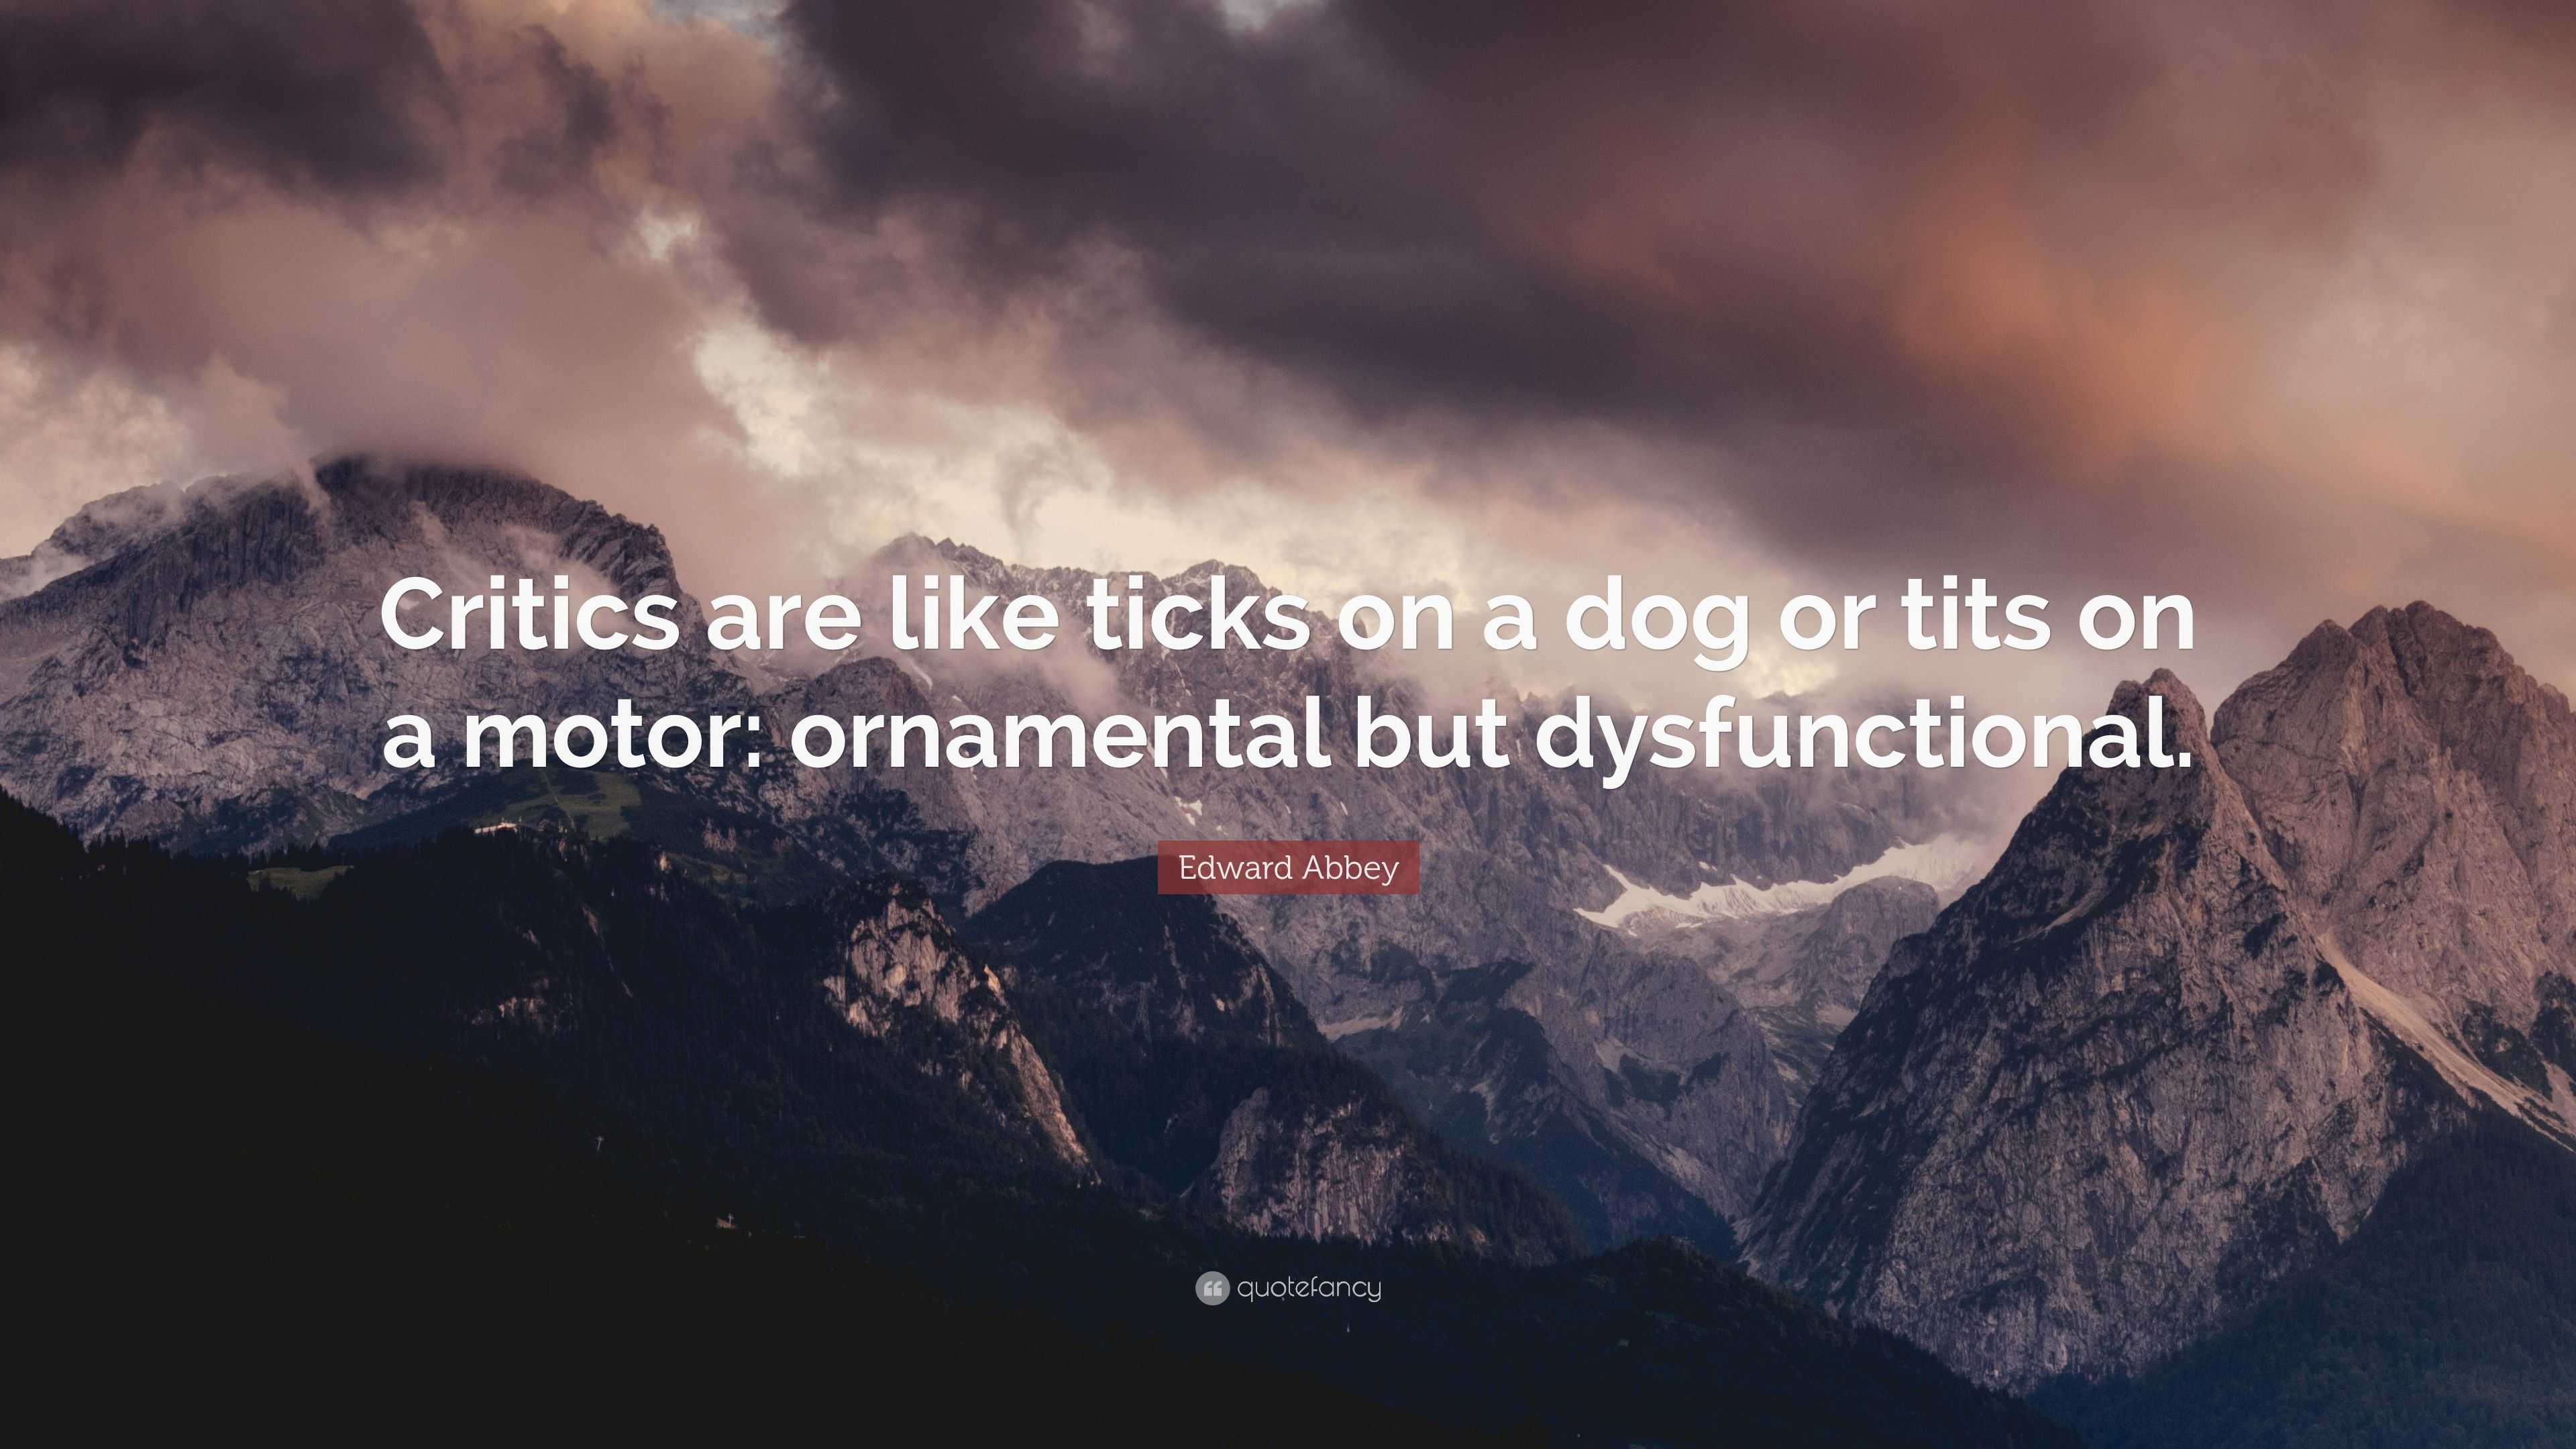 https://quotefancy.com/media/wallpaper/3840x2160/5717778-Edward-Abbey-Quote-Critics-are-like-ticks-on-a-dog-or-tits-on-a.jpg